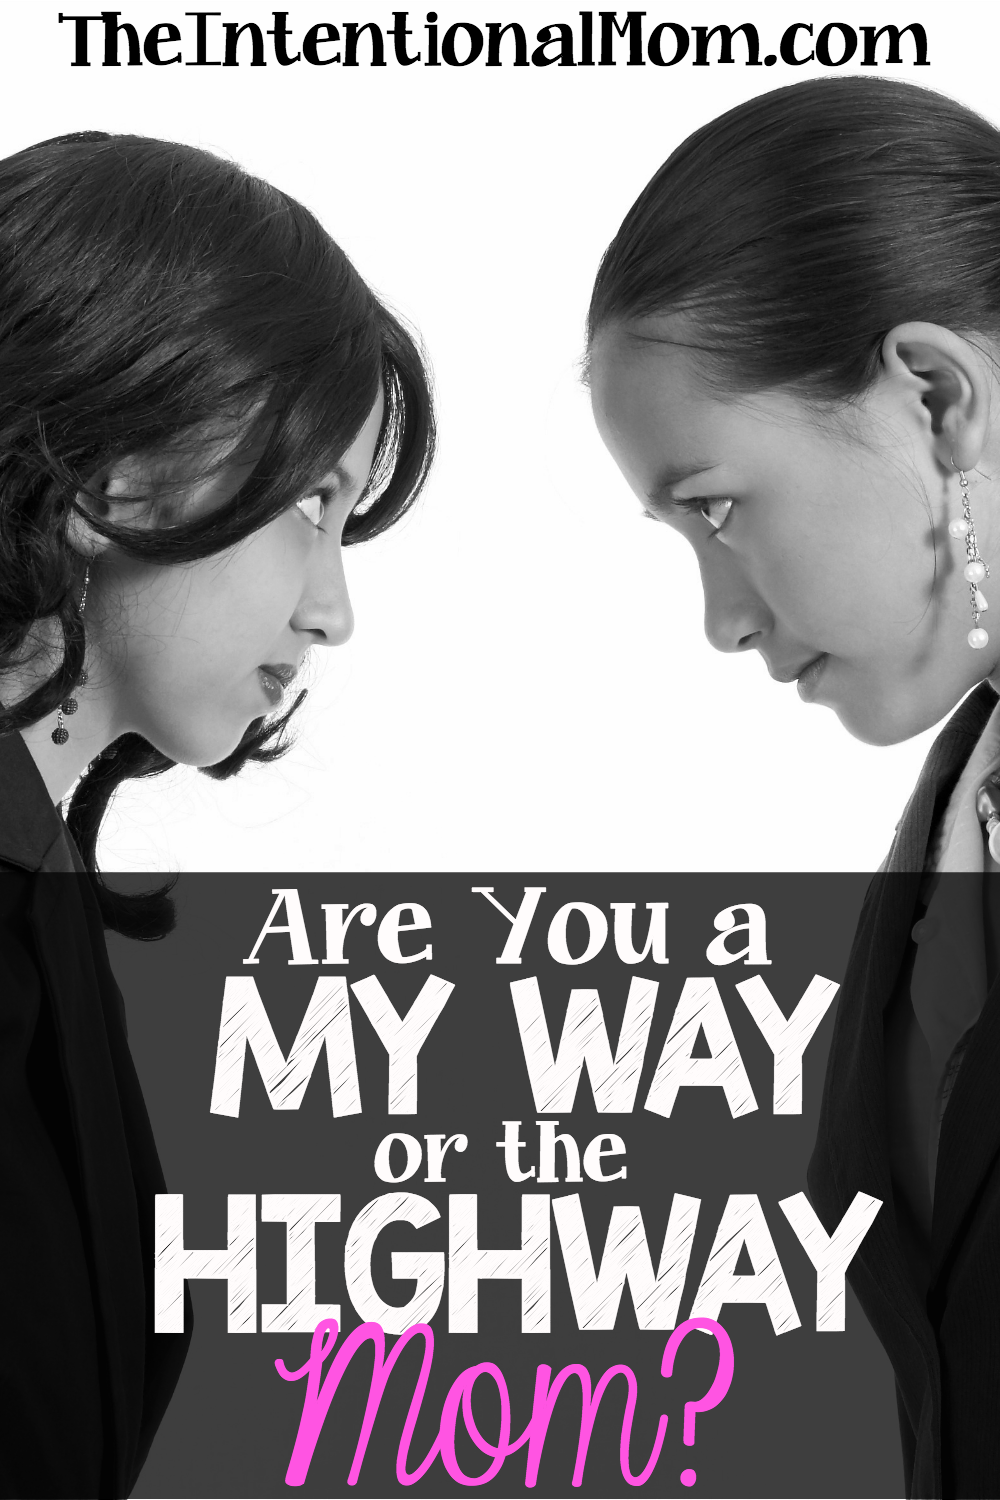 Are you a “My Way or the Highway” Mom?